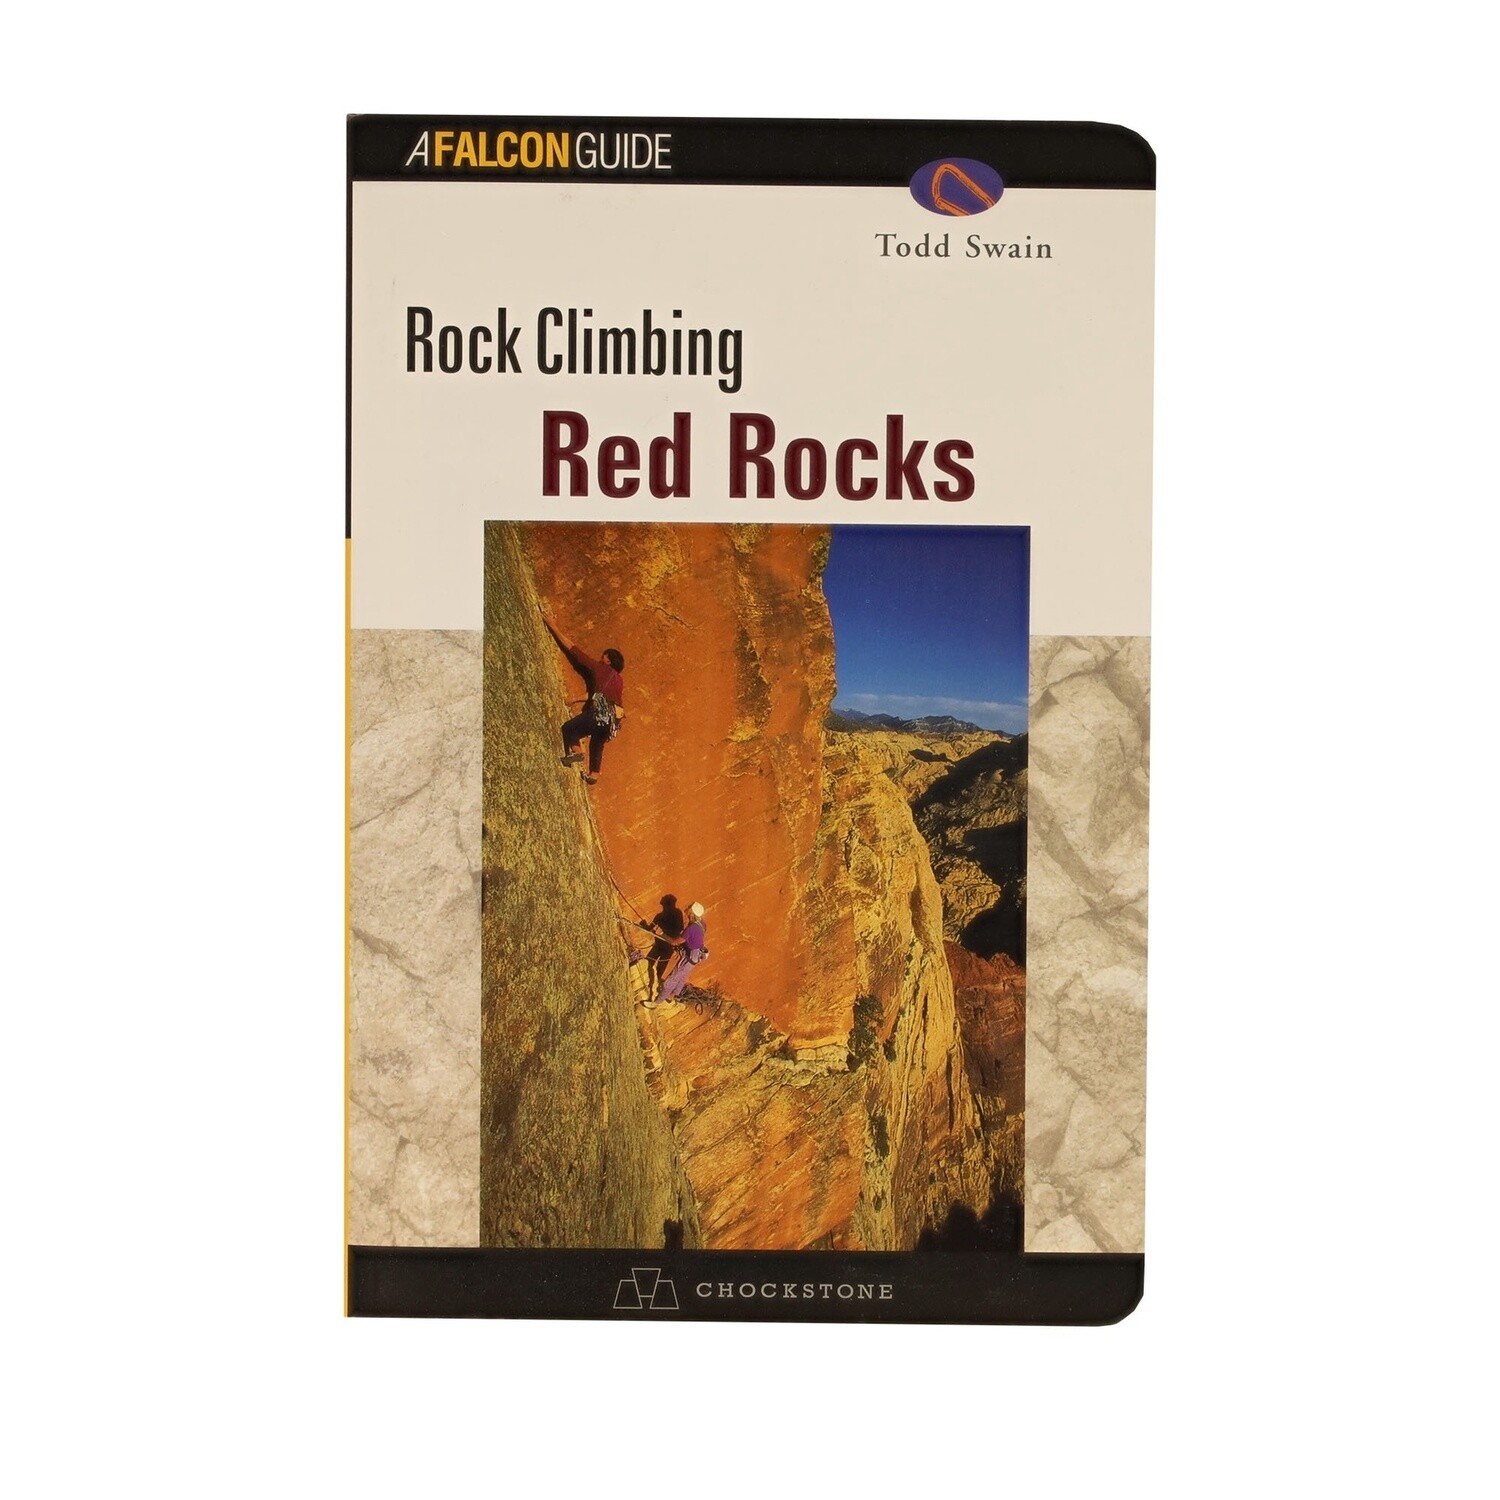 Rock Climbing - Red Rocks by Todd Swain